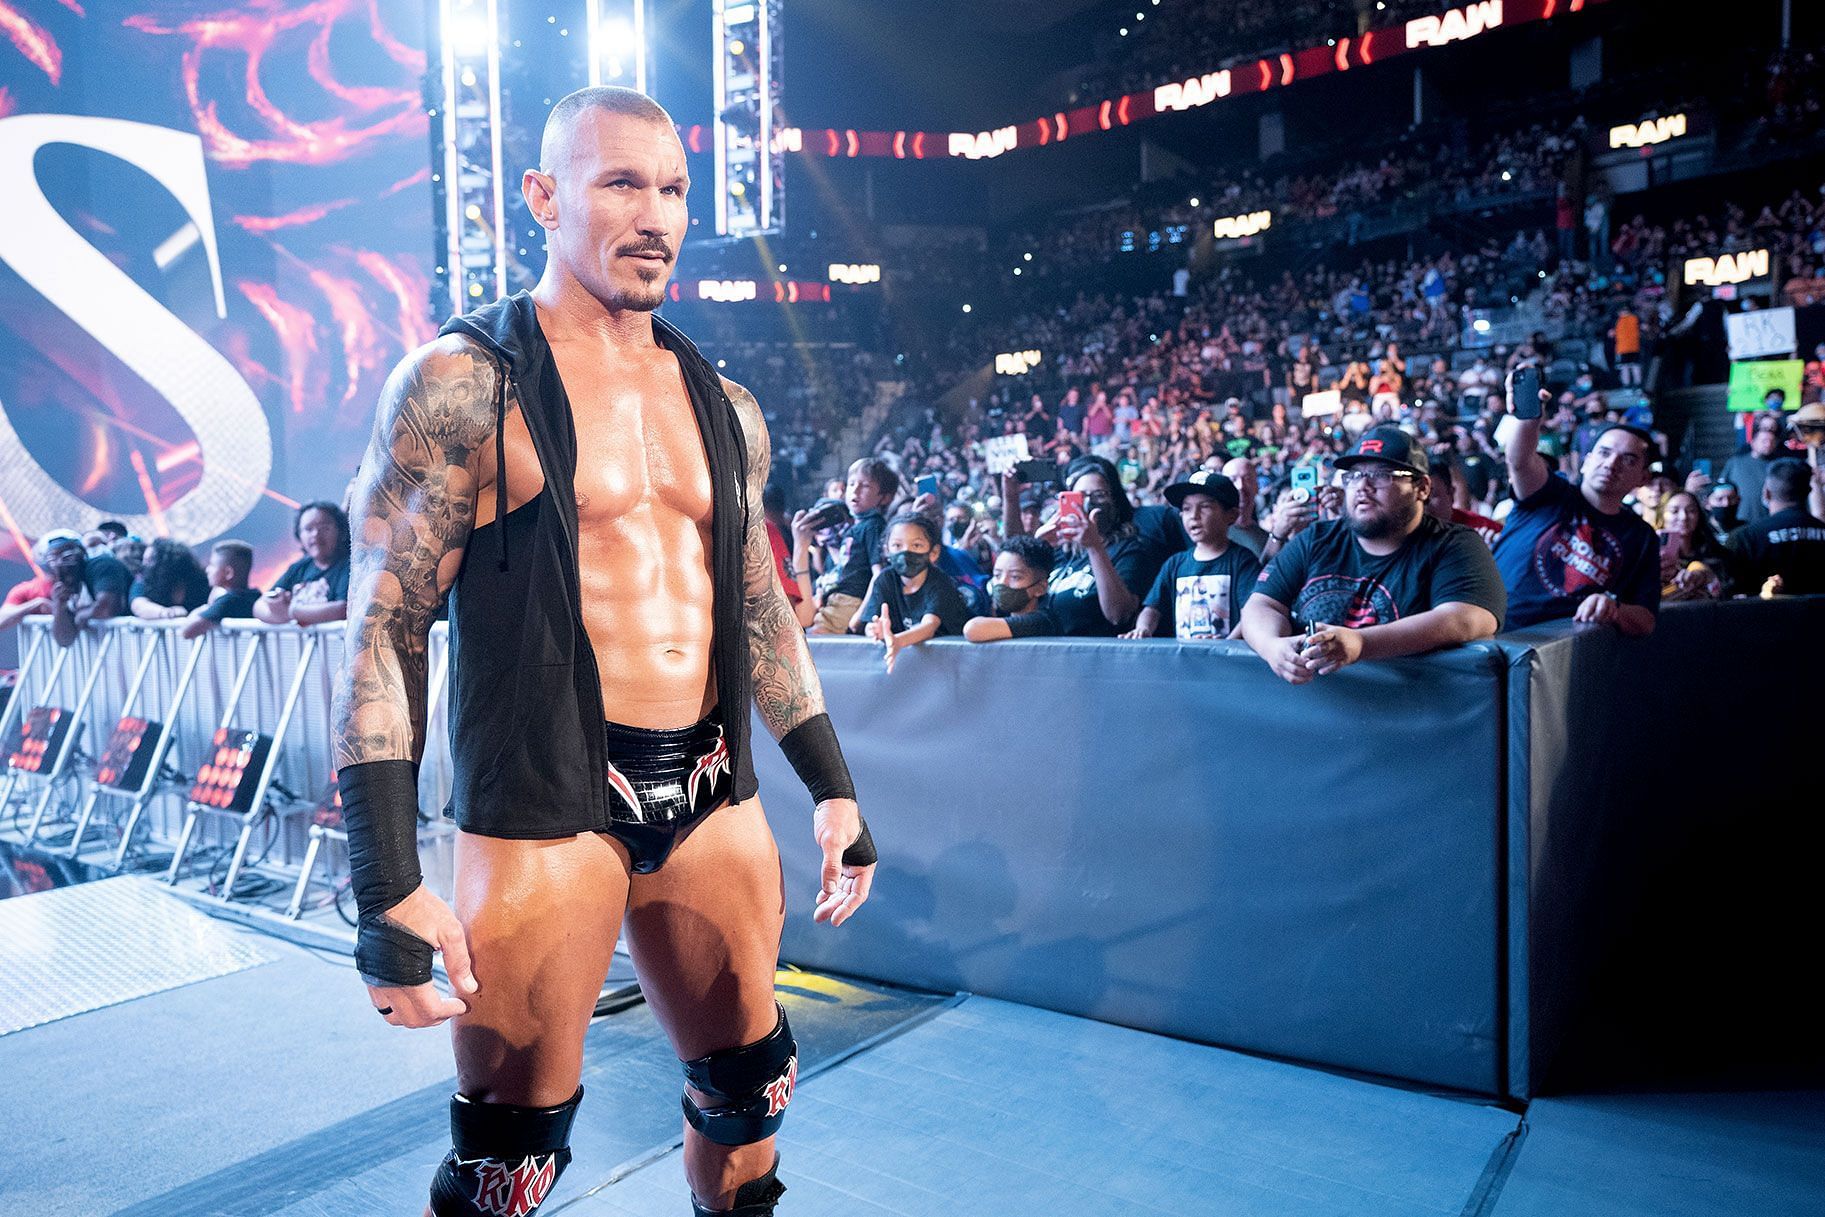 Will Orton face punishment for his actions on SmackDown?